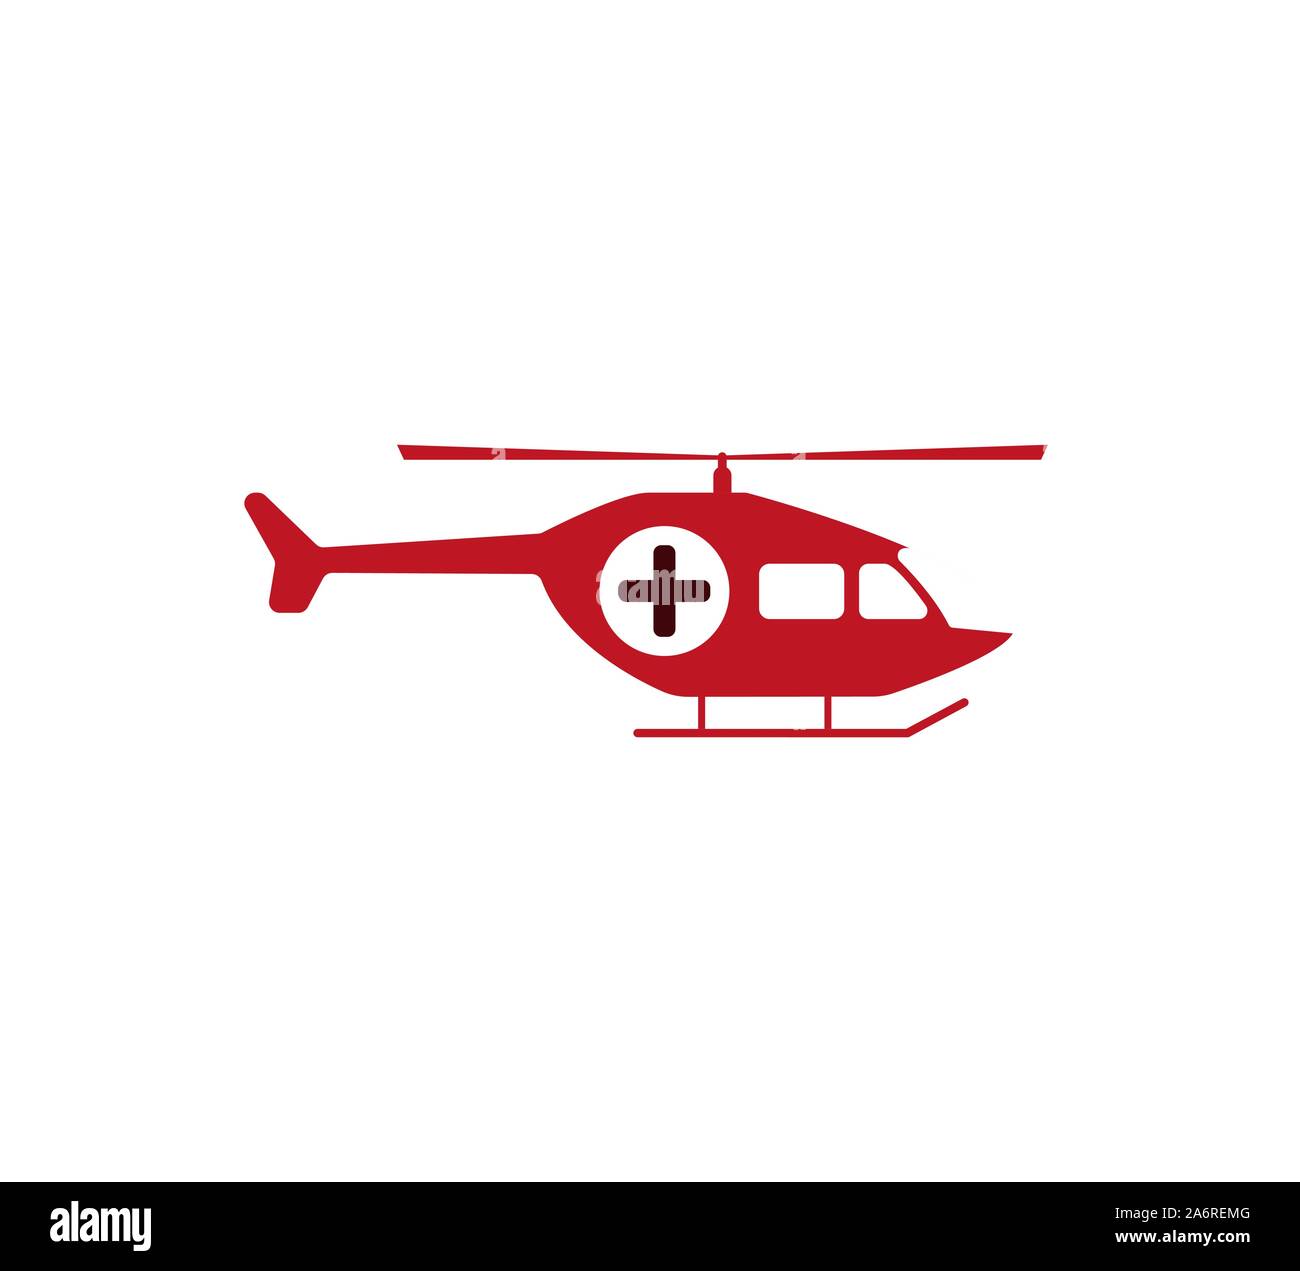 Helicopter Stock Vector Images - Alamy